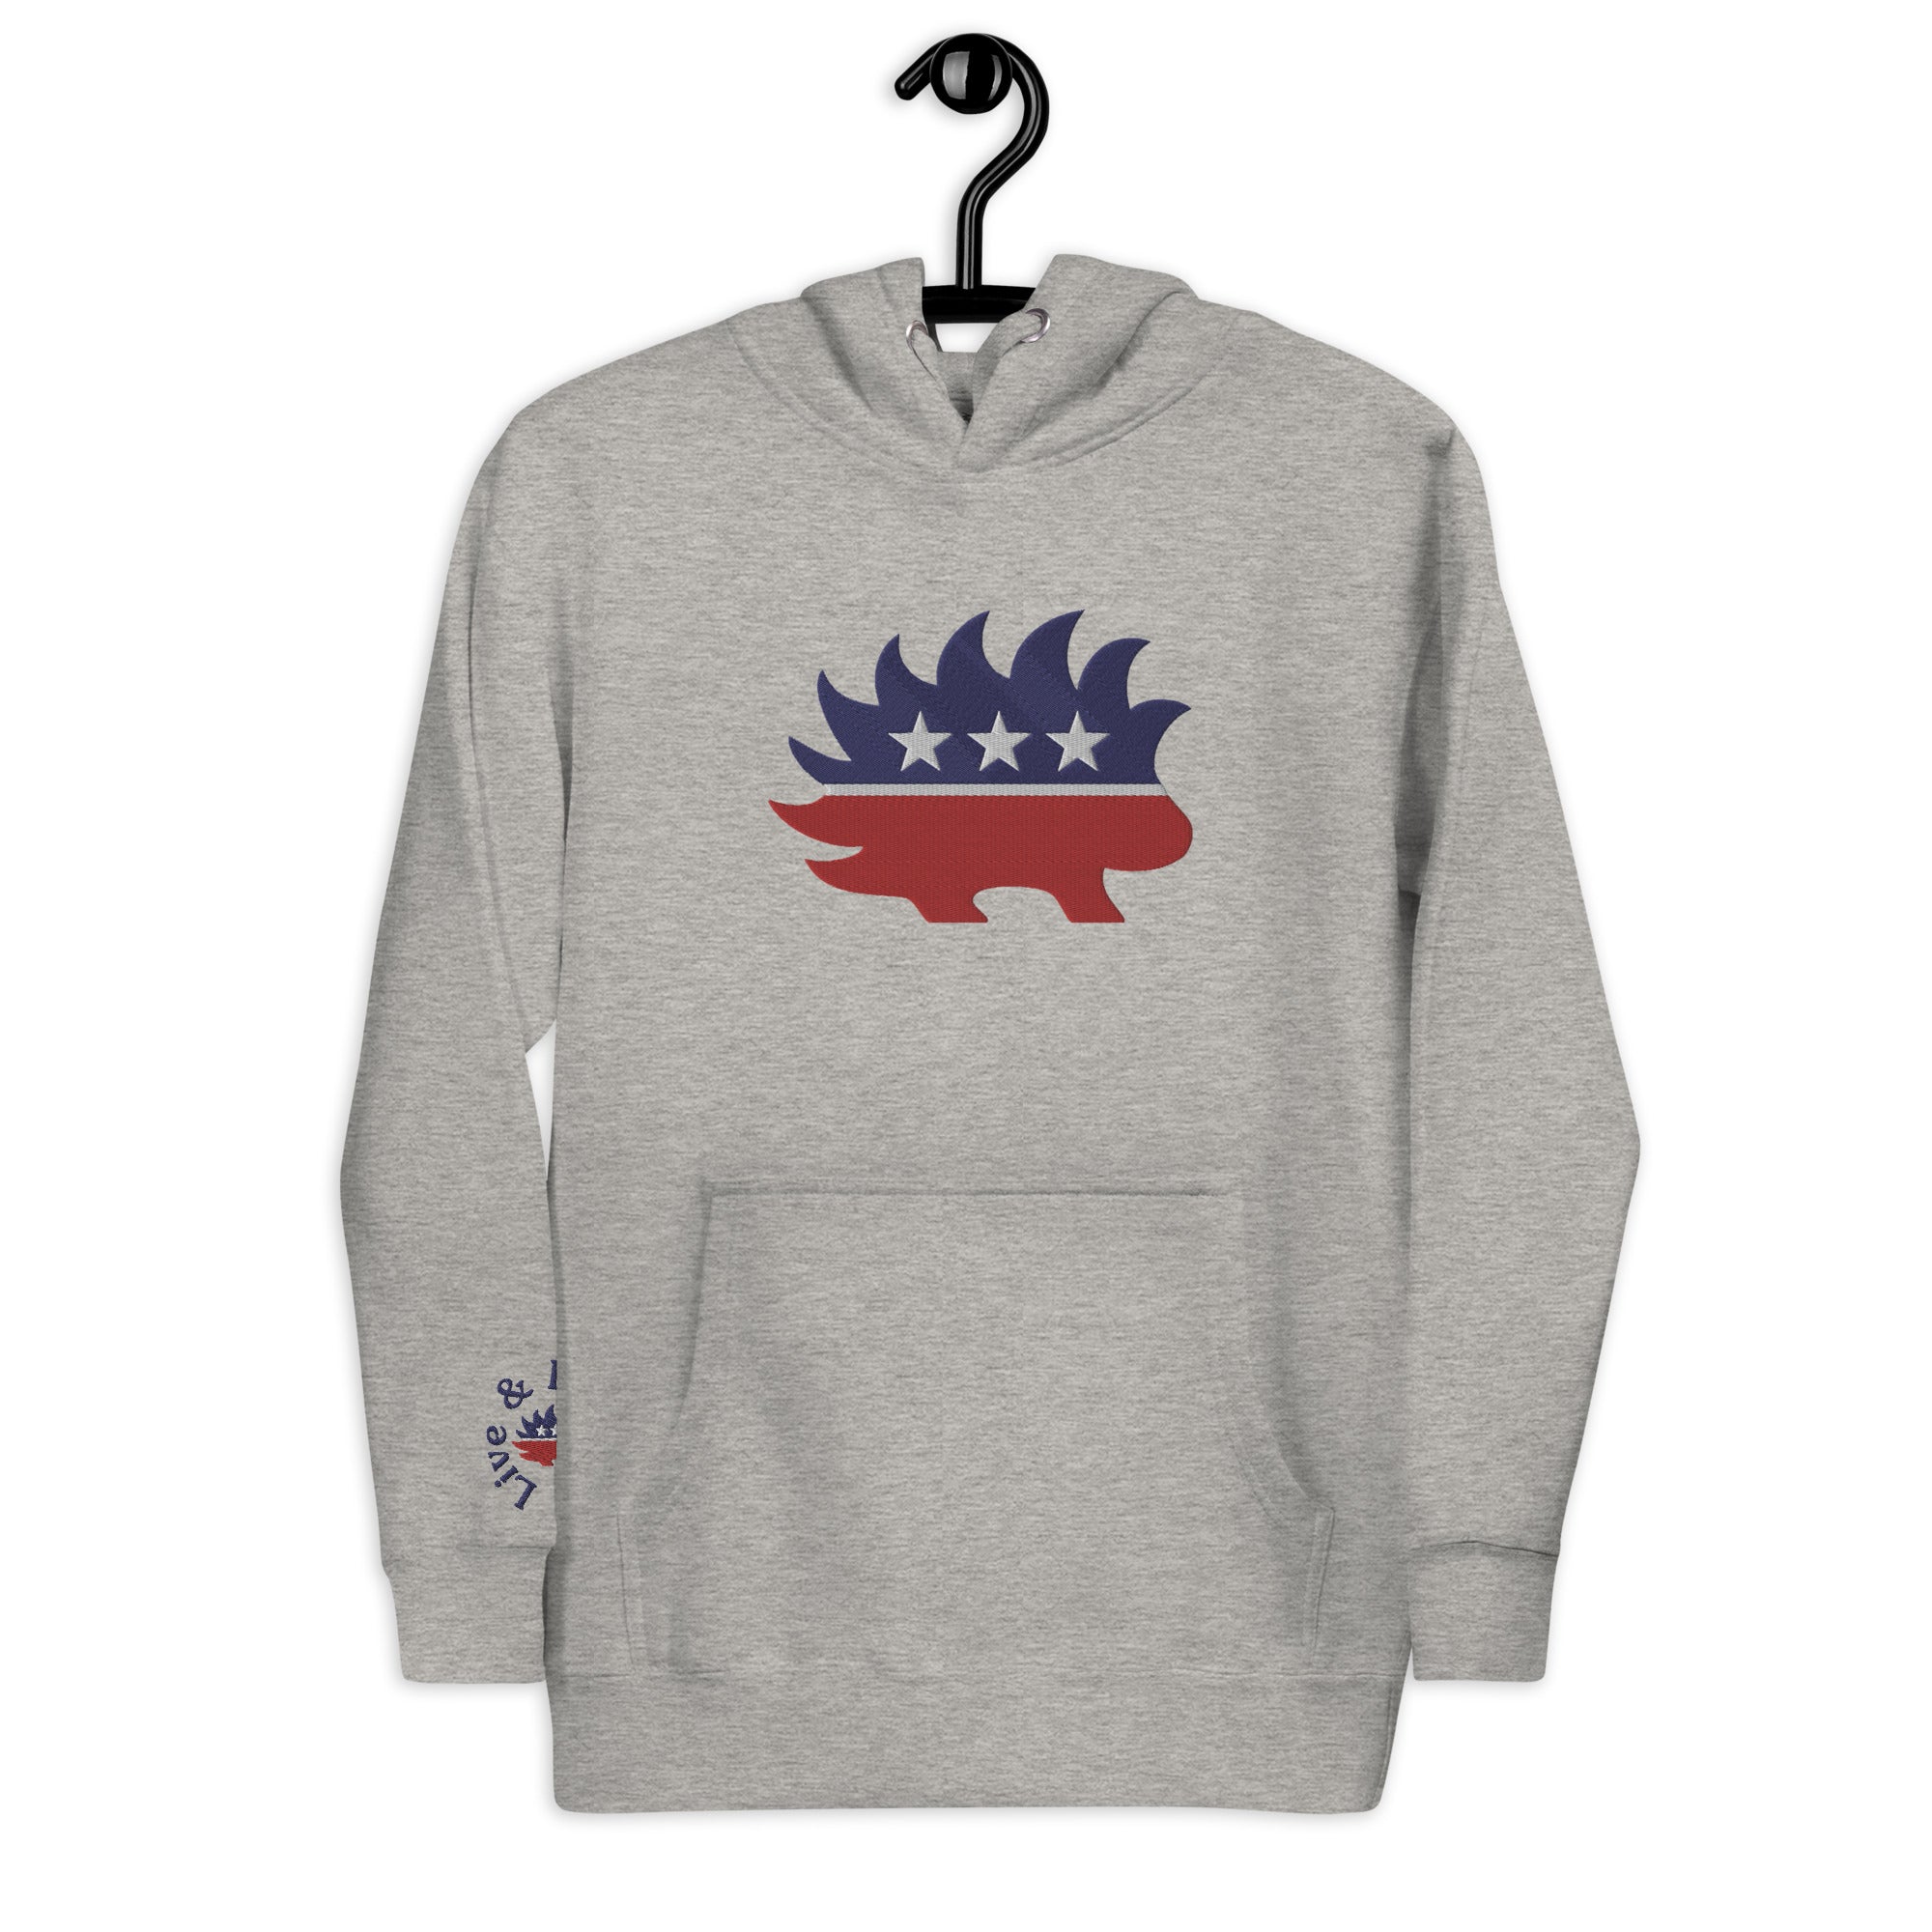 Porcupine Mascot Live & Let Live Embroidered Hoodie Sweatshirts